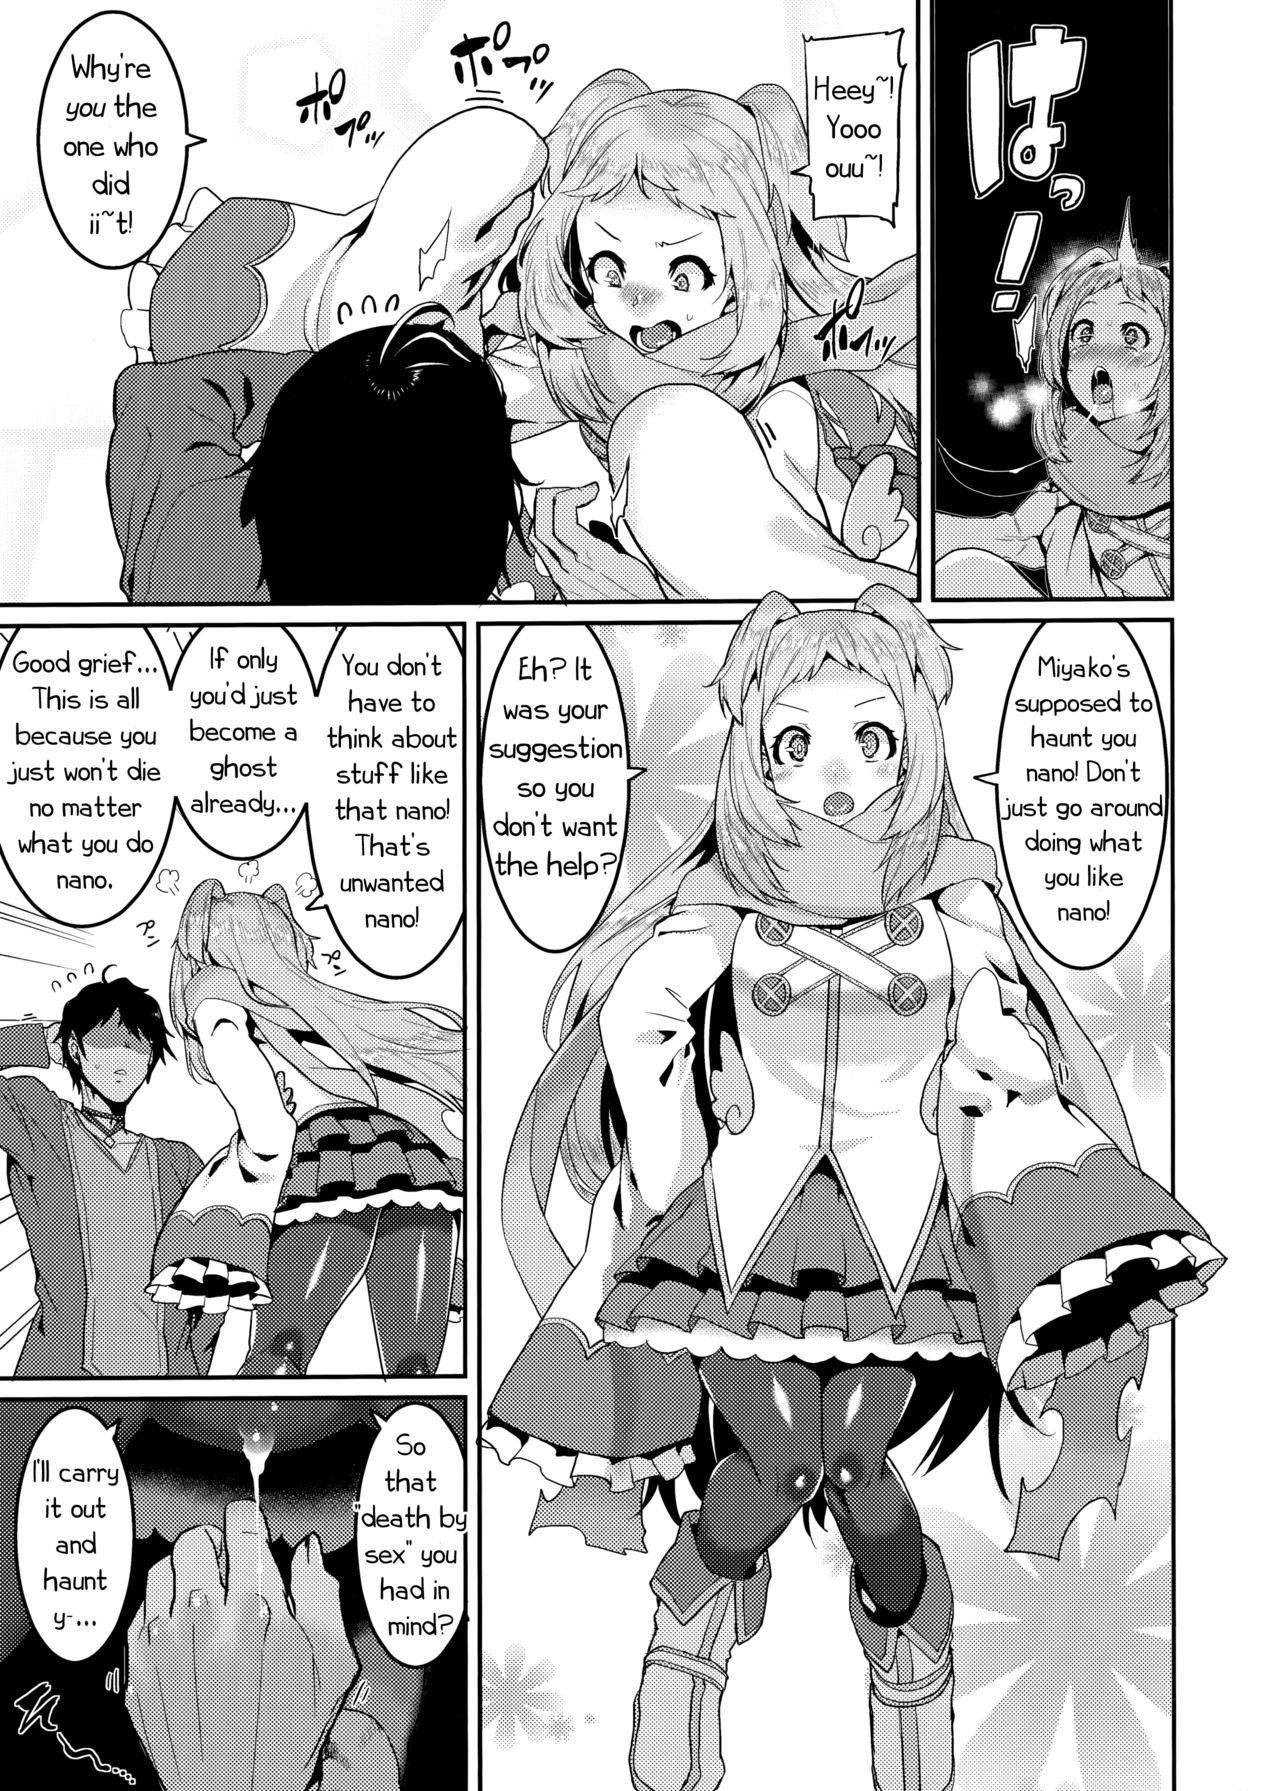 Live Pudding Switch - Princess connect Camgirl - Page 7